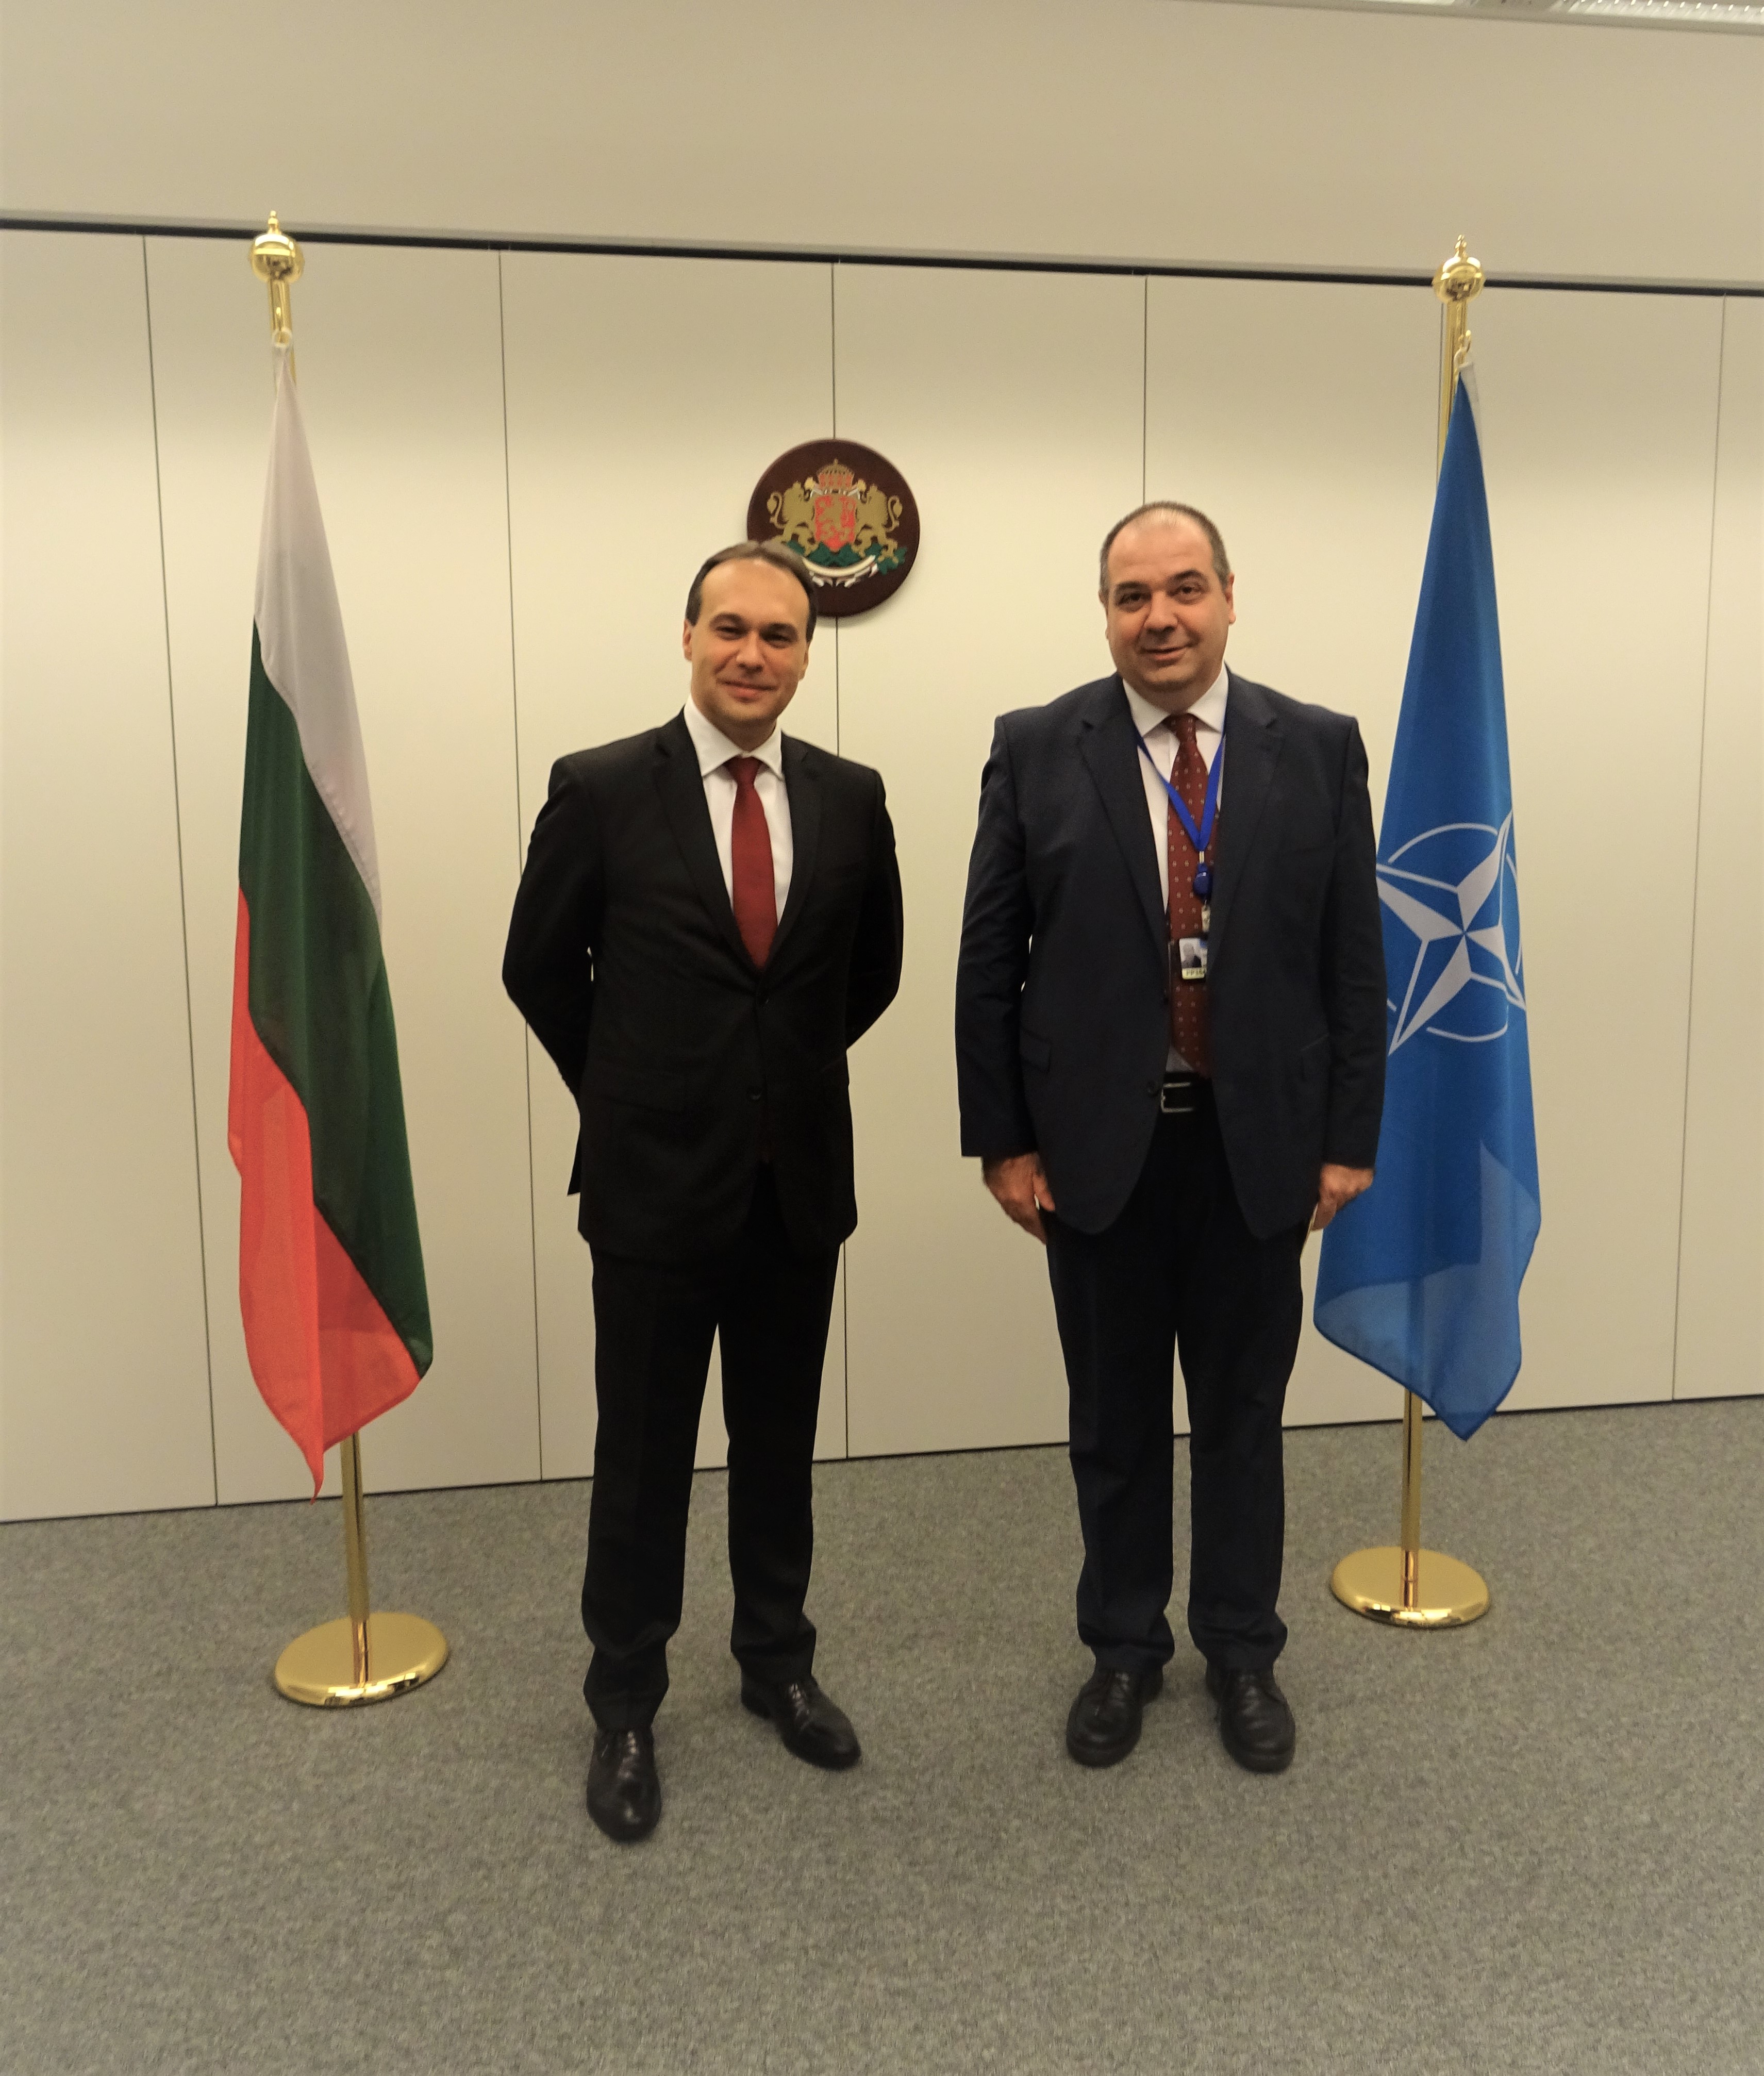 Bulgaria's National Day was celebrated with martenitsa's at NATO Headquarters